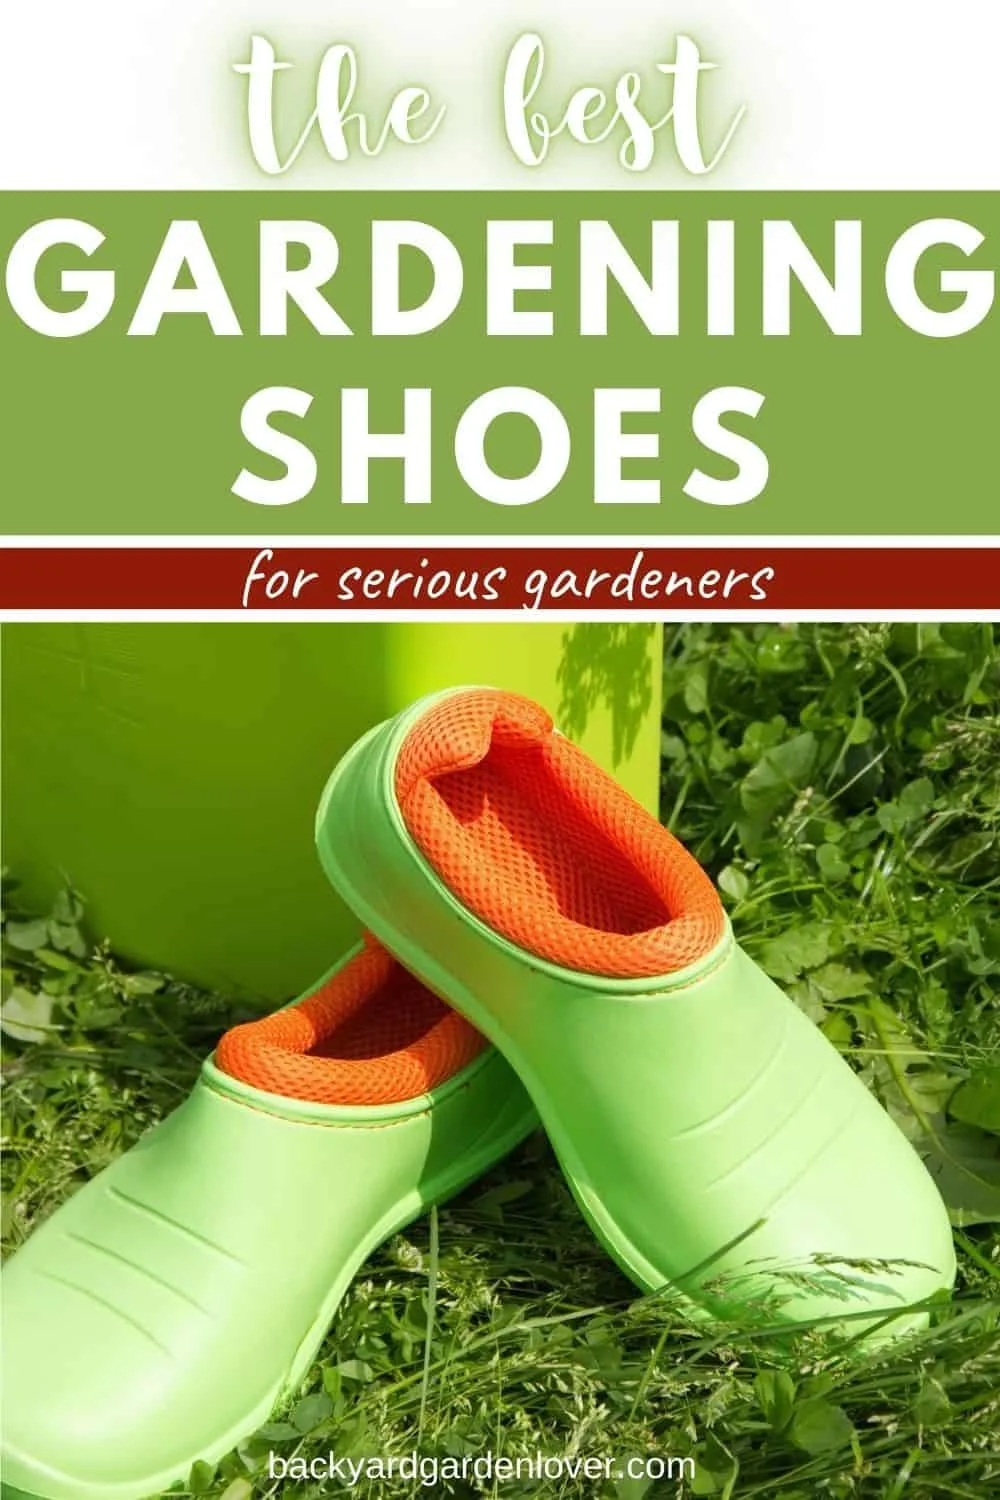 The best gardening shoes for serious gardeners - Pinterest image